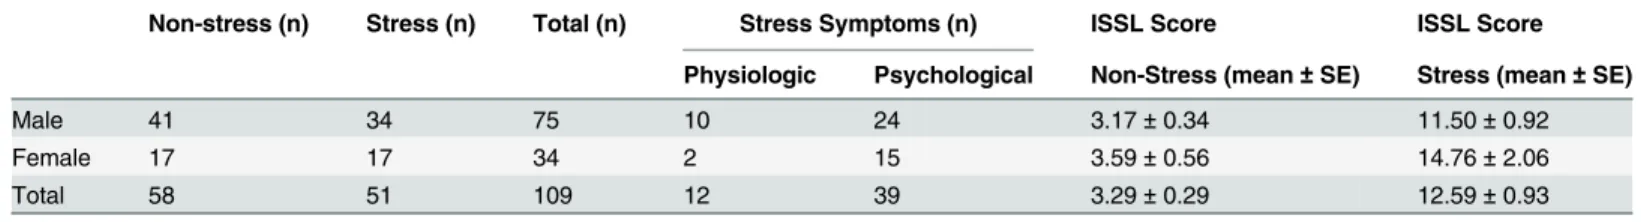 Table 2. Incidence and symptoms of stress in business executives assessed by Lipp Inventory of Stress Symptoms for Adults (ISSL).